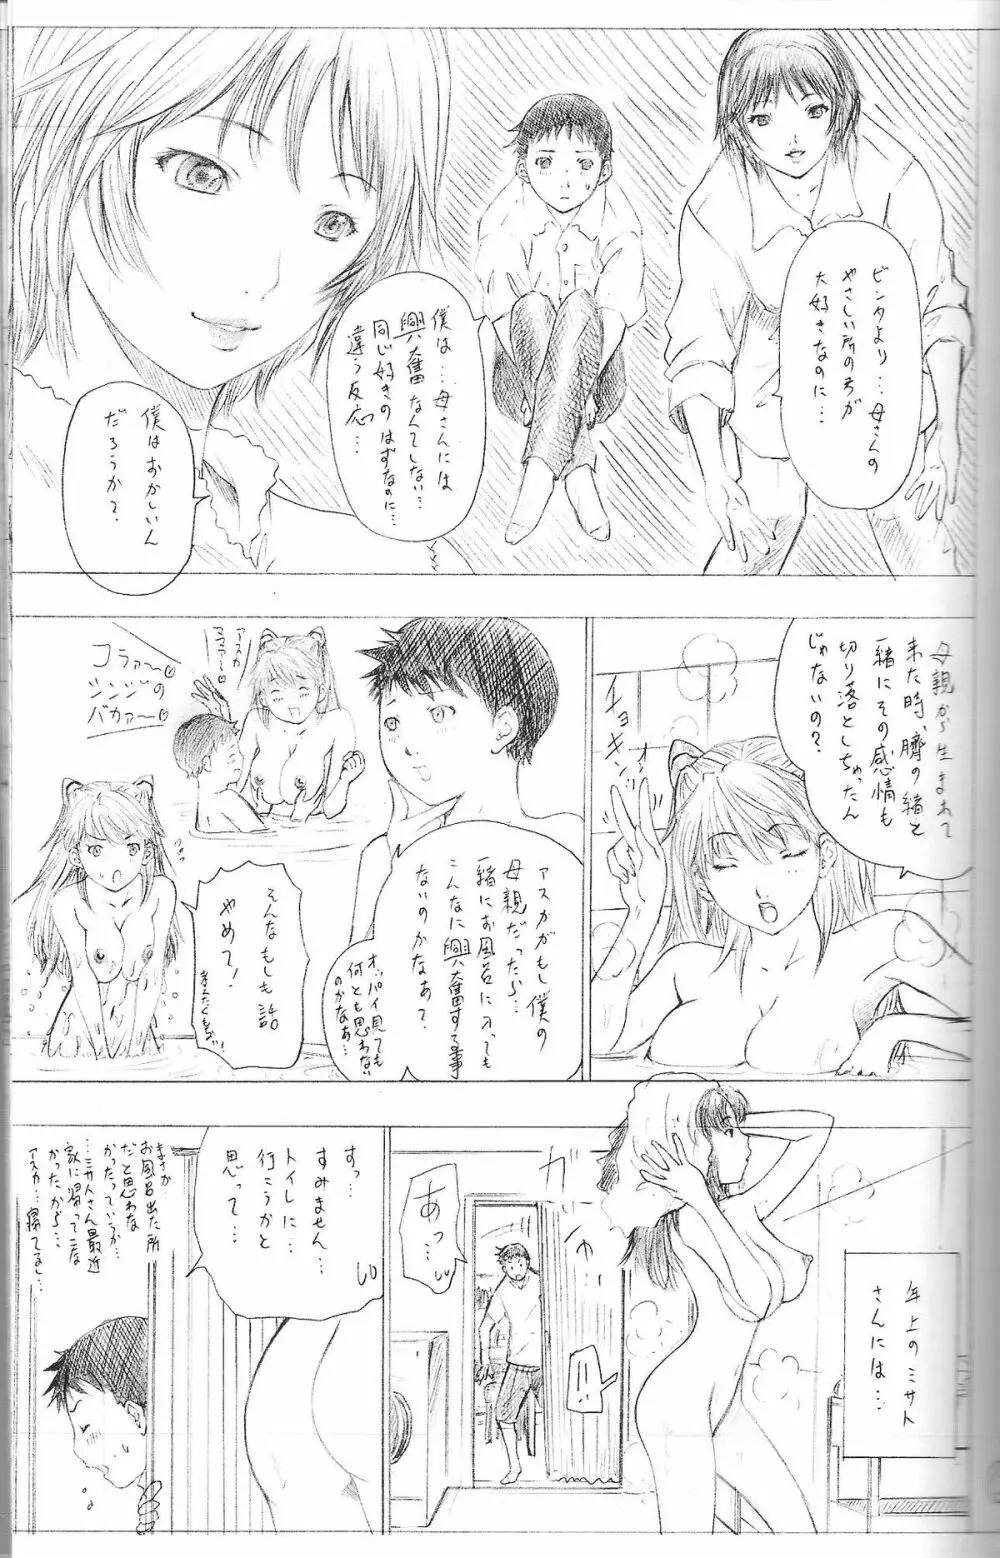 2010 ONLY ASKA WINTER pilot version Page.7